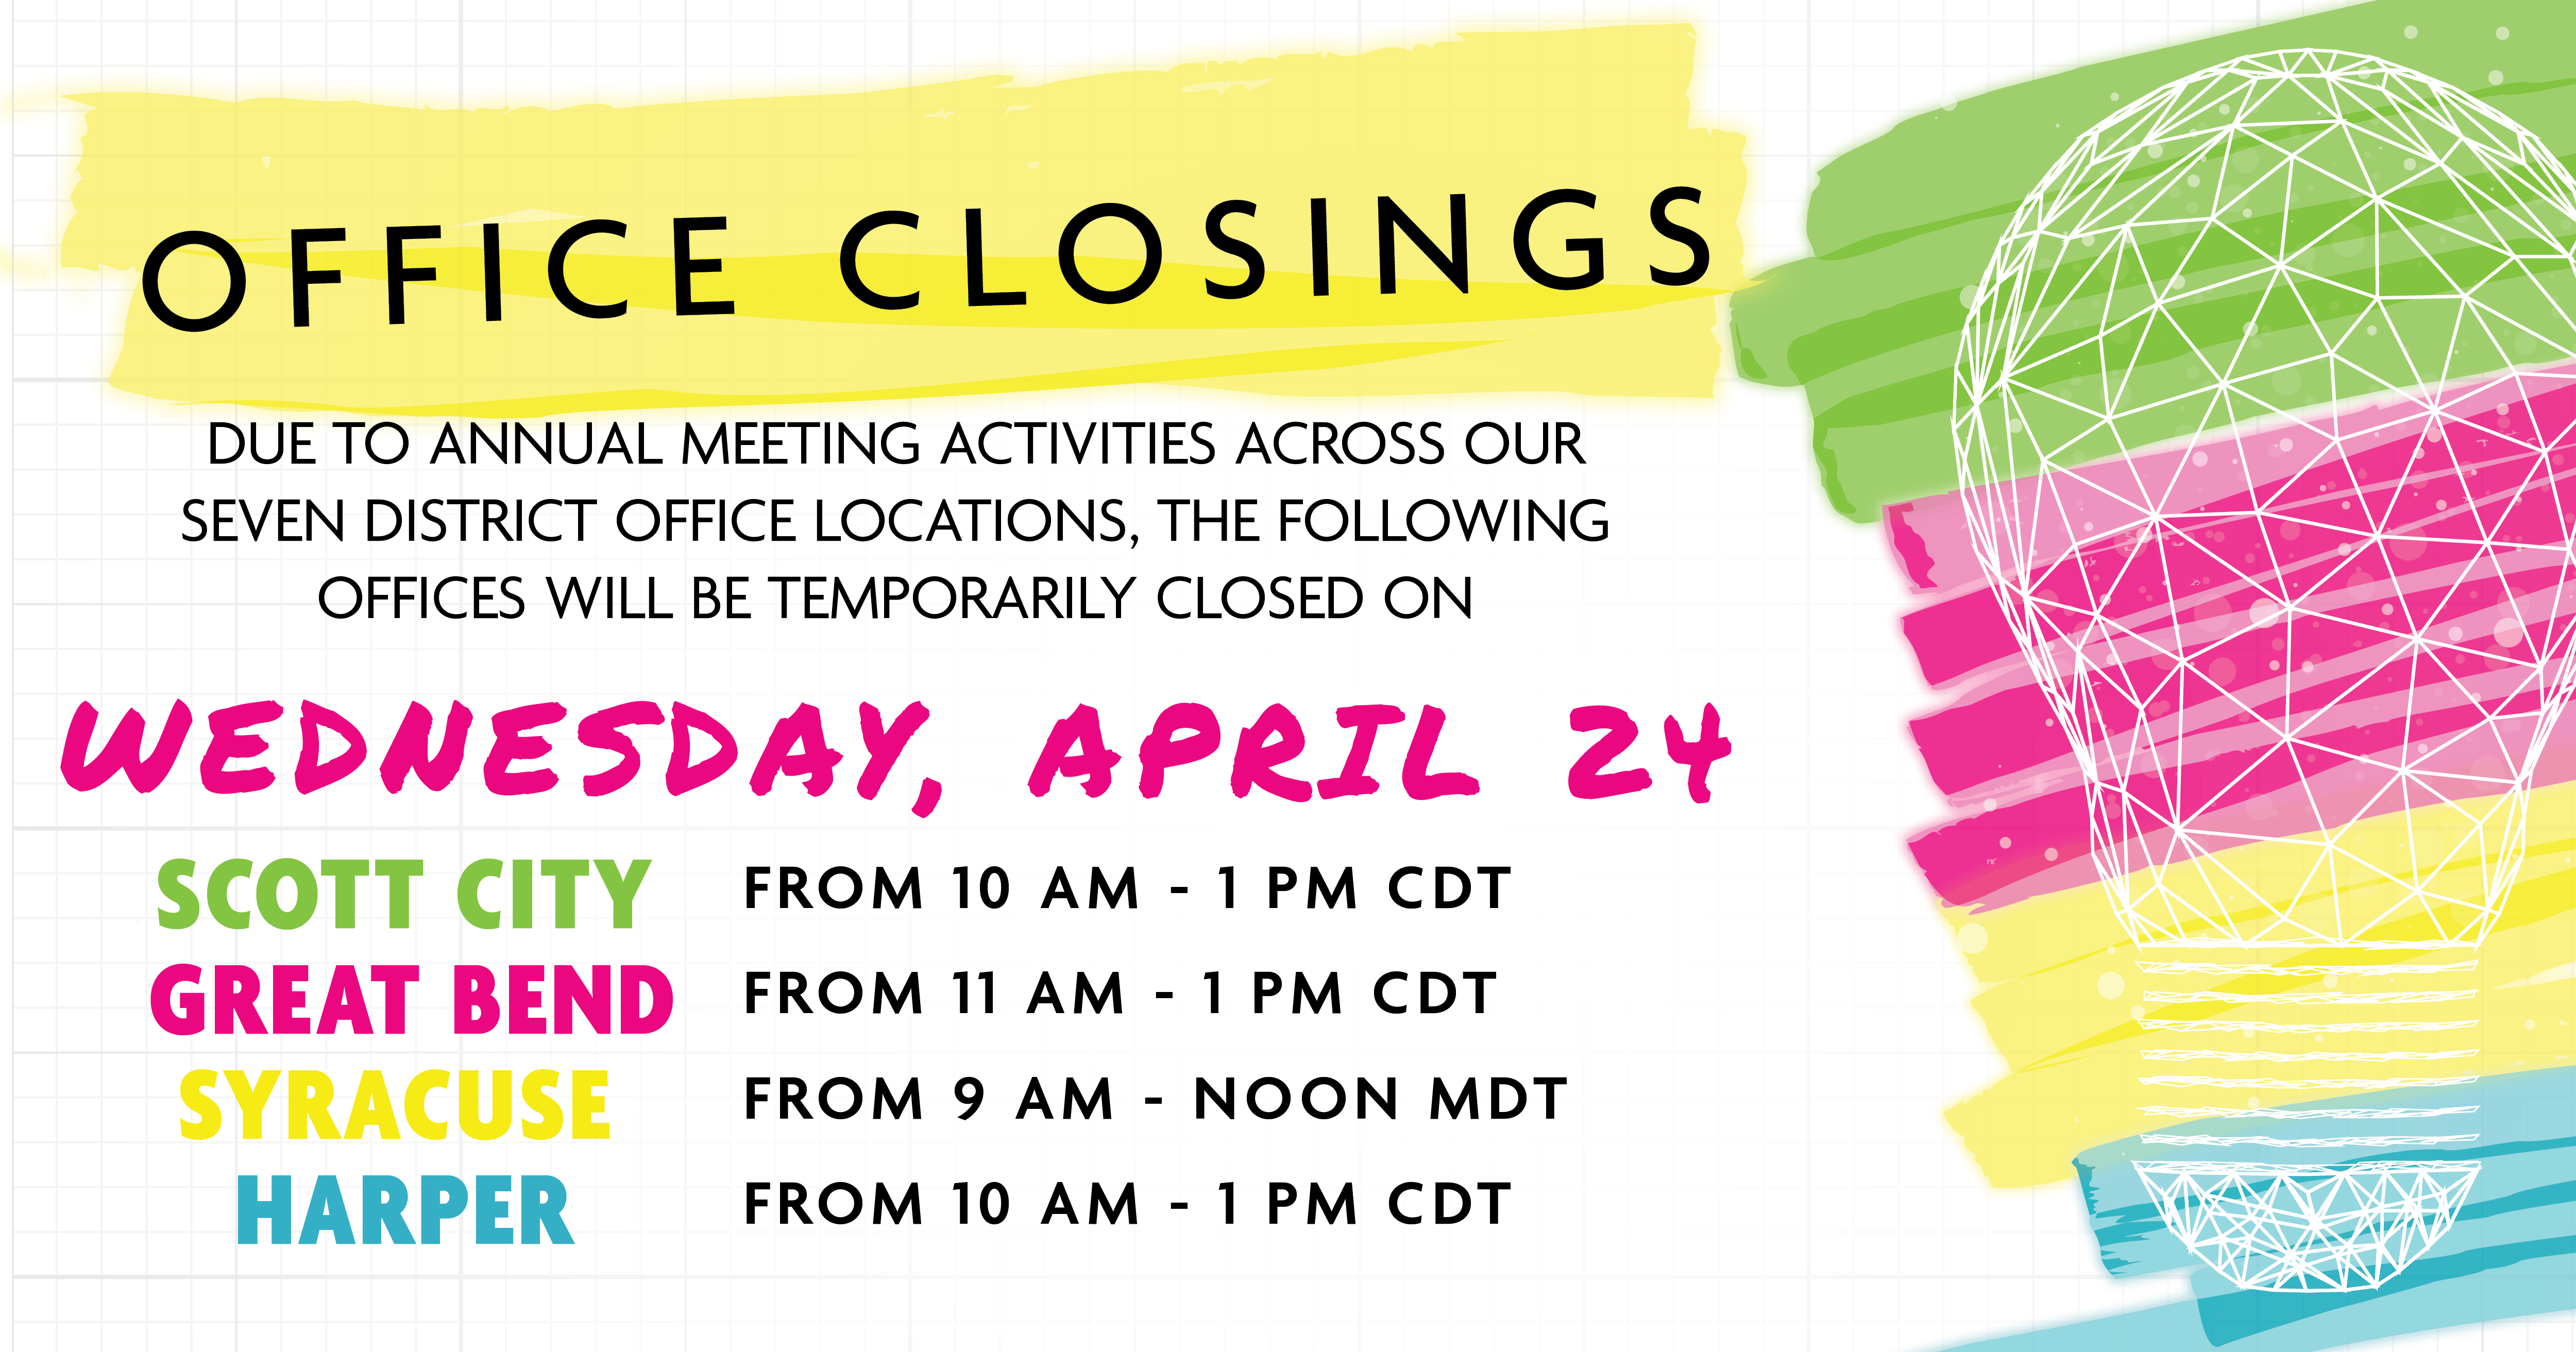 Office Closings on April 24